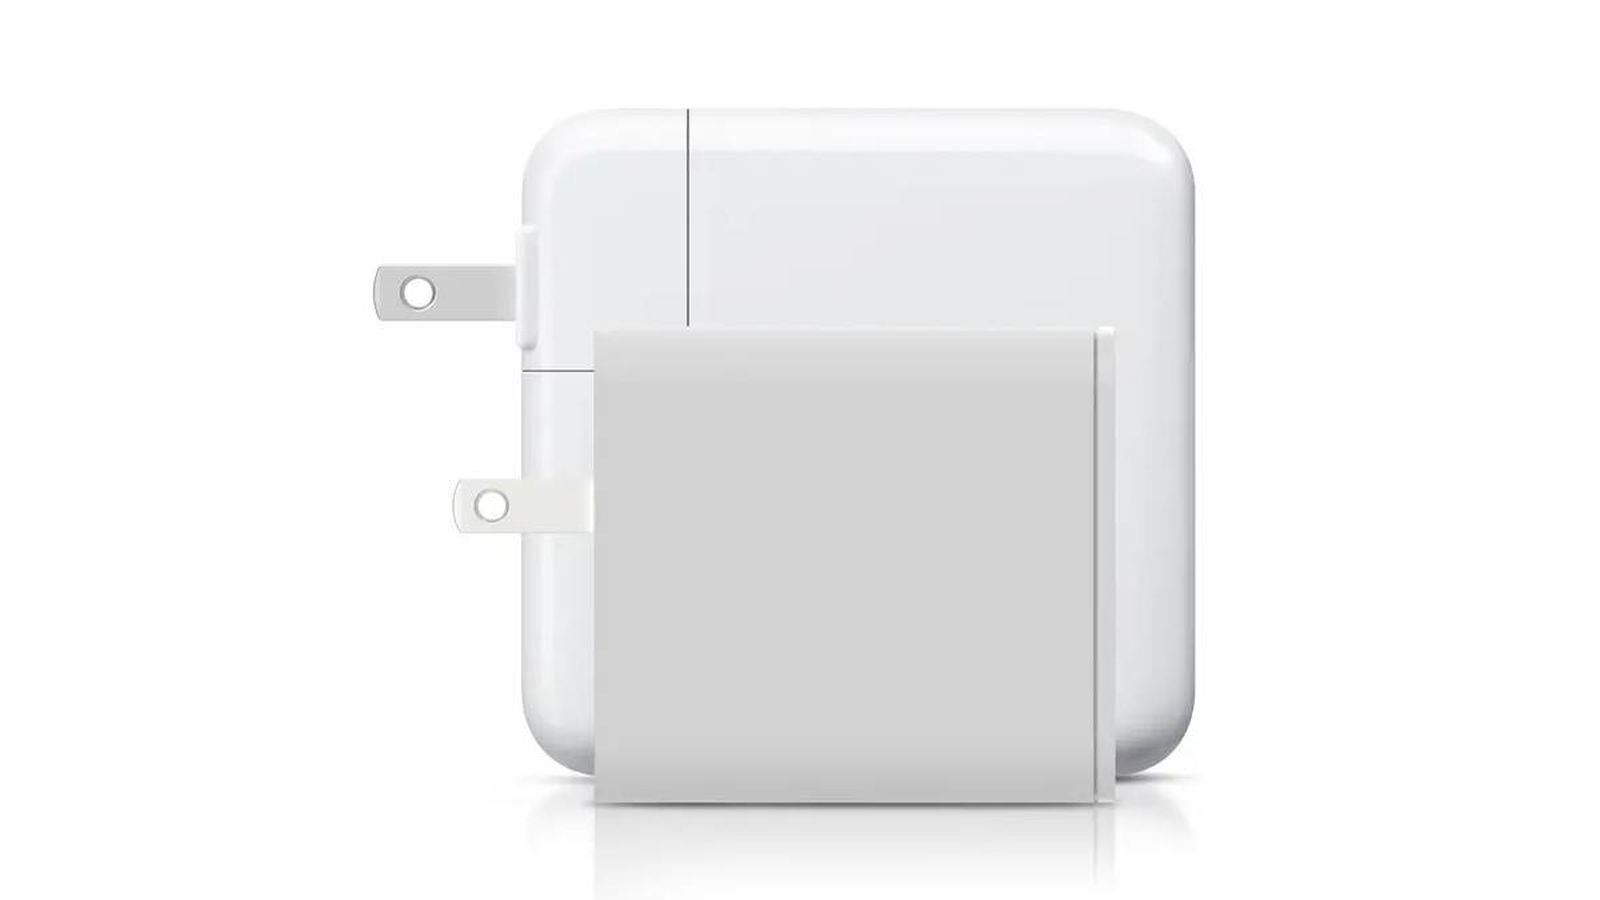 Apple Begins Selling Mophie's New Ultra-Compact USB-C Chargers Designed for iPhones, iPads, and Macs